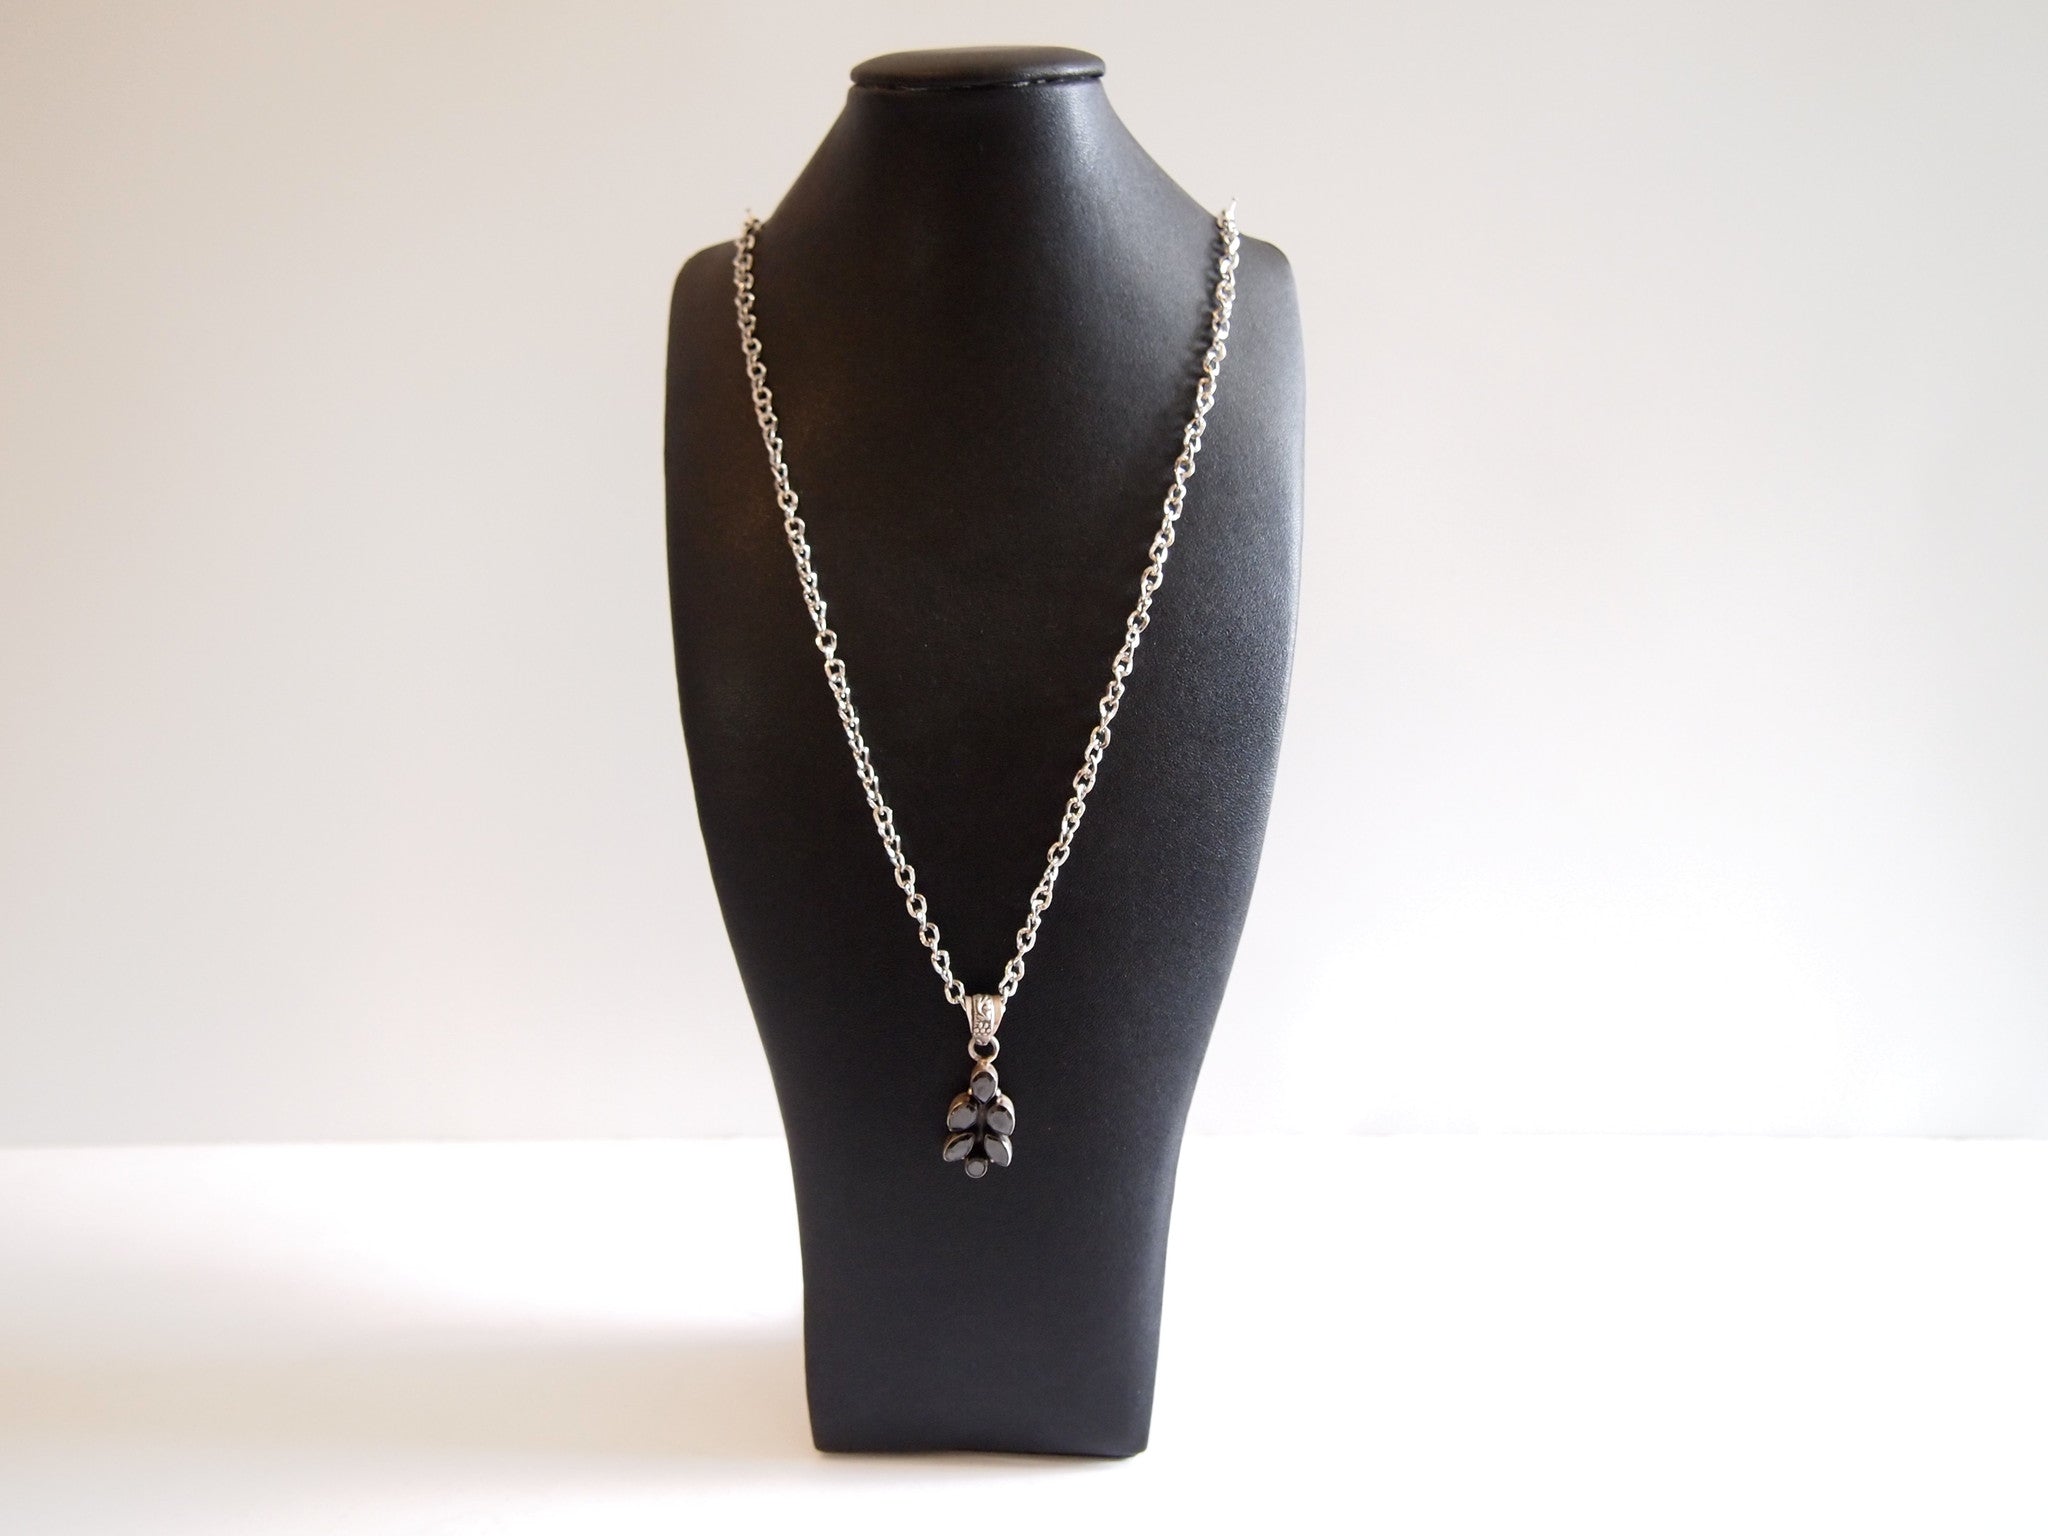 Handmade necklace with onyx with silver rhodium  chain